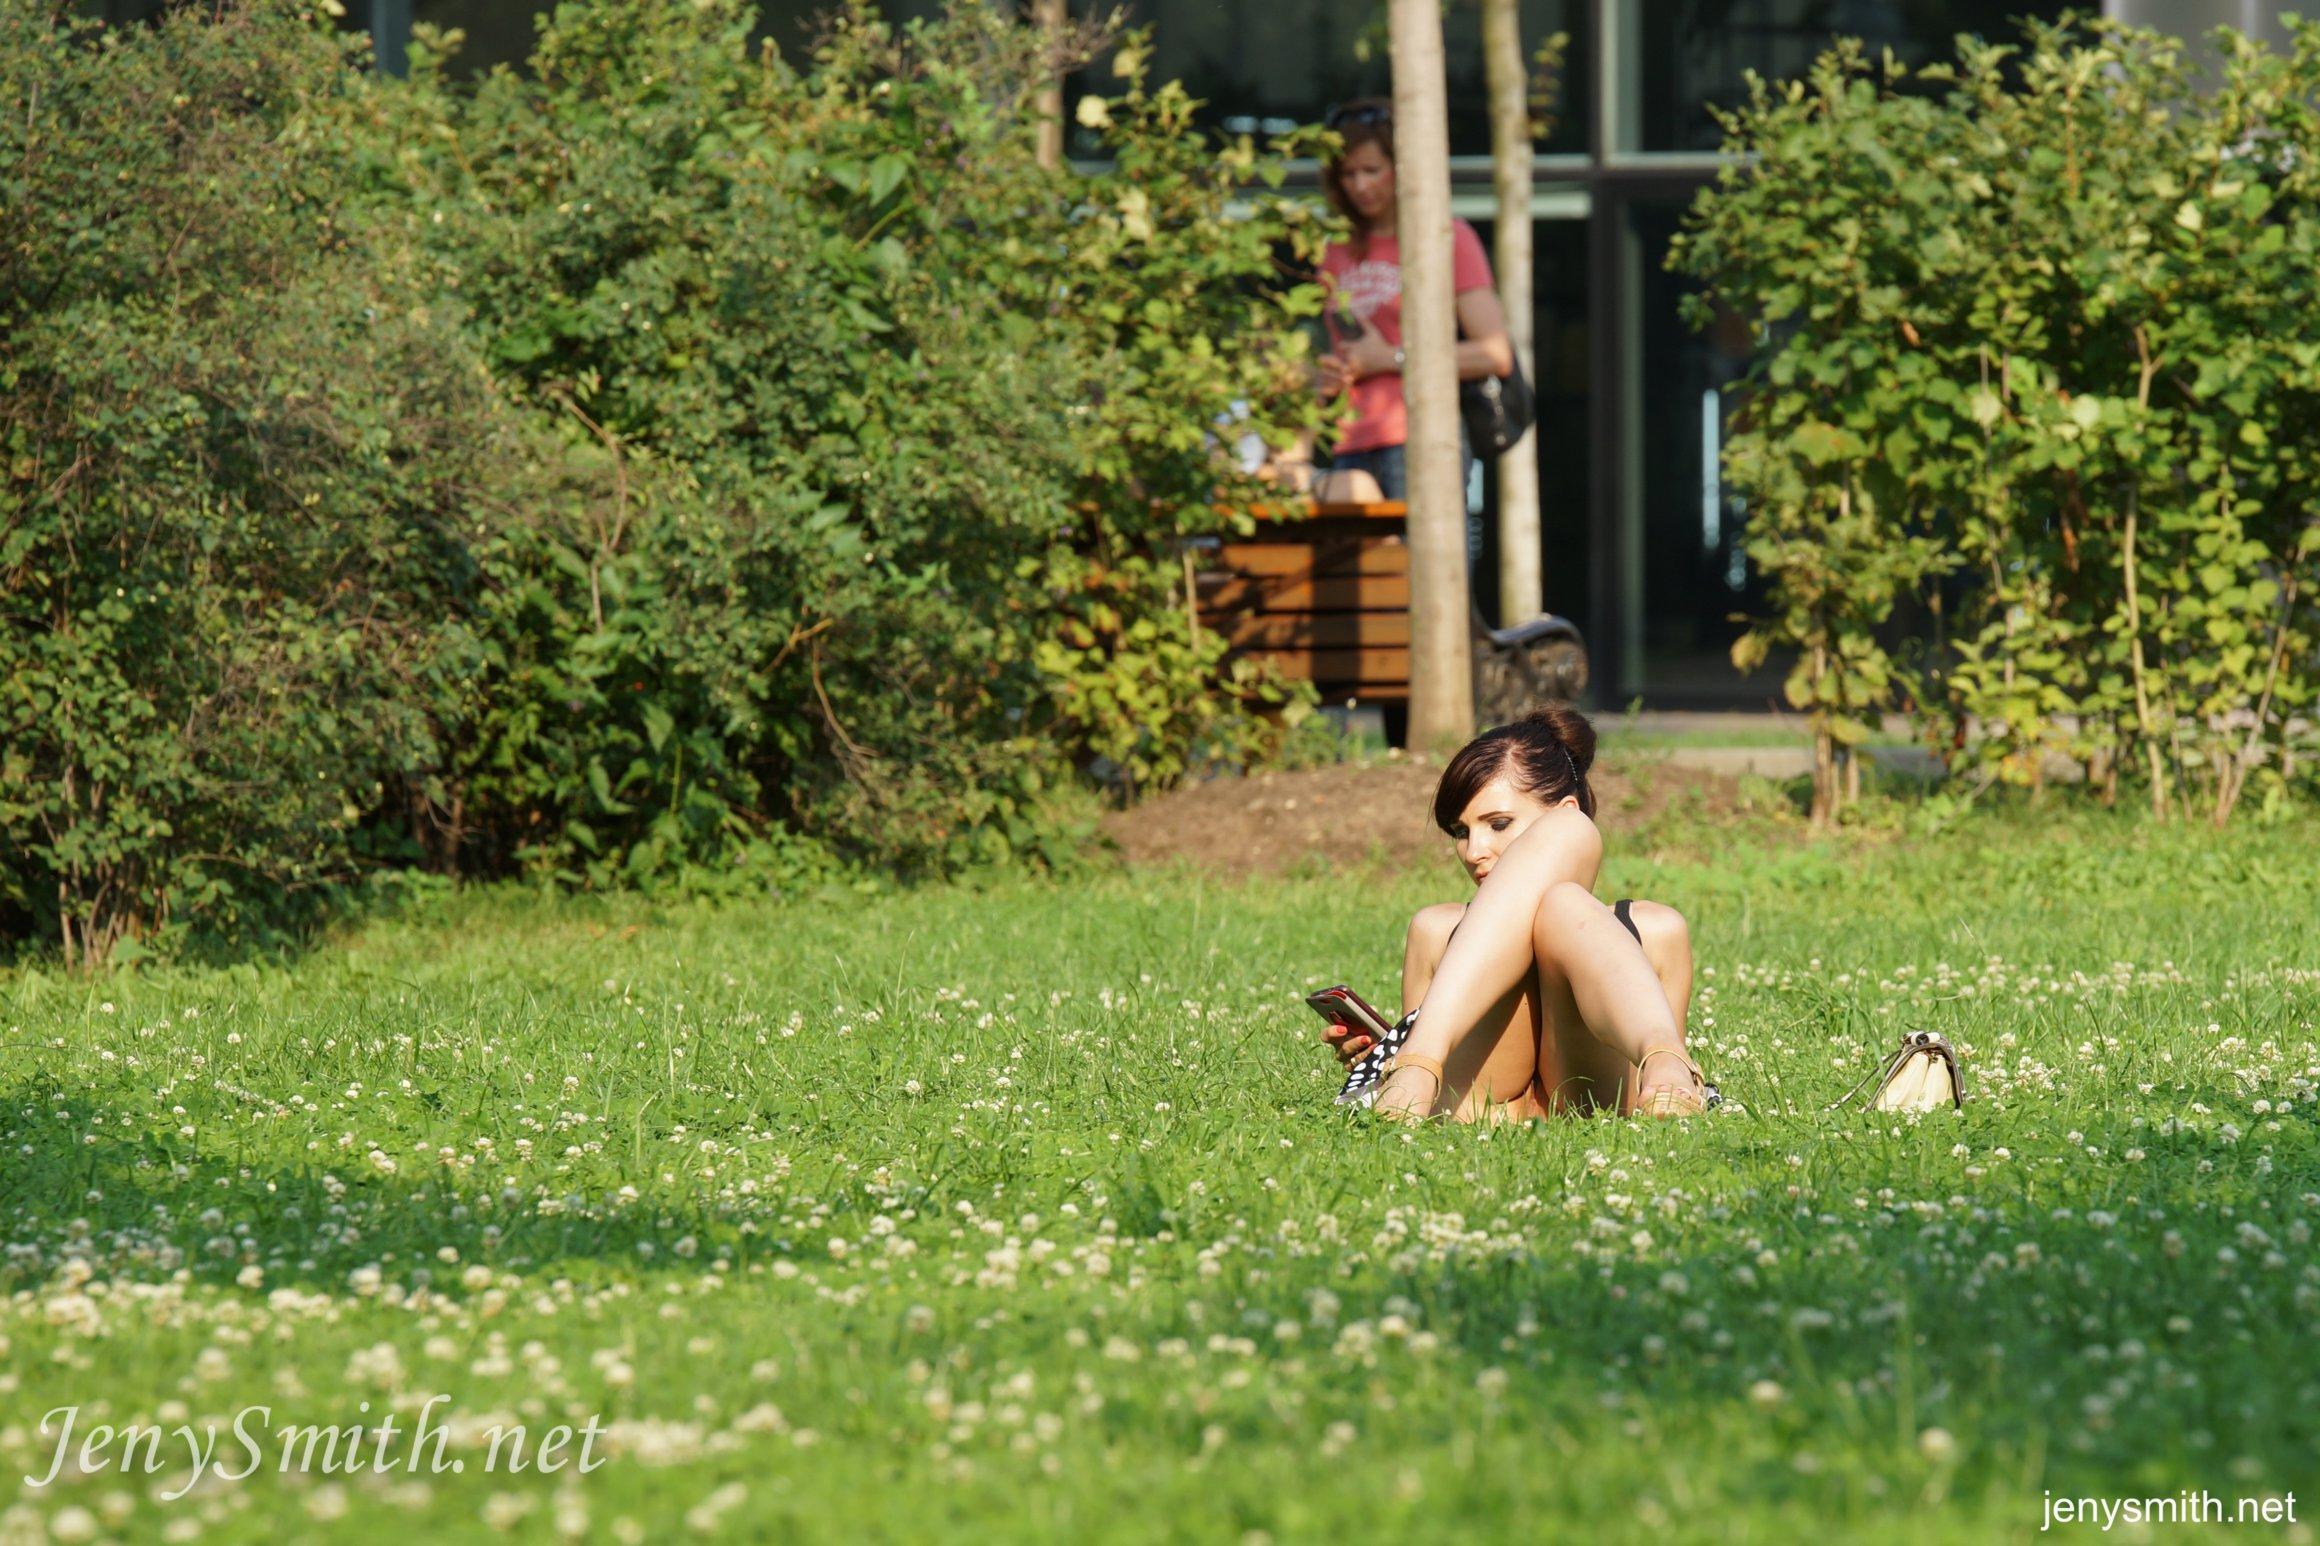 next door mate jenny smith doing some upskirt teasing in the public parc #7